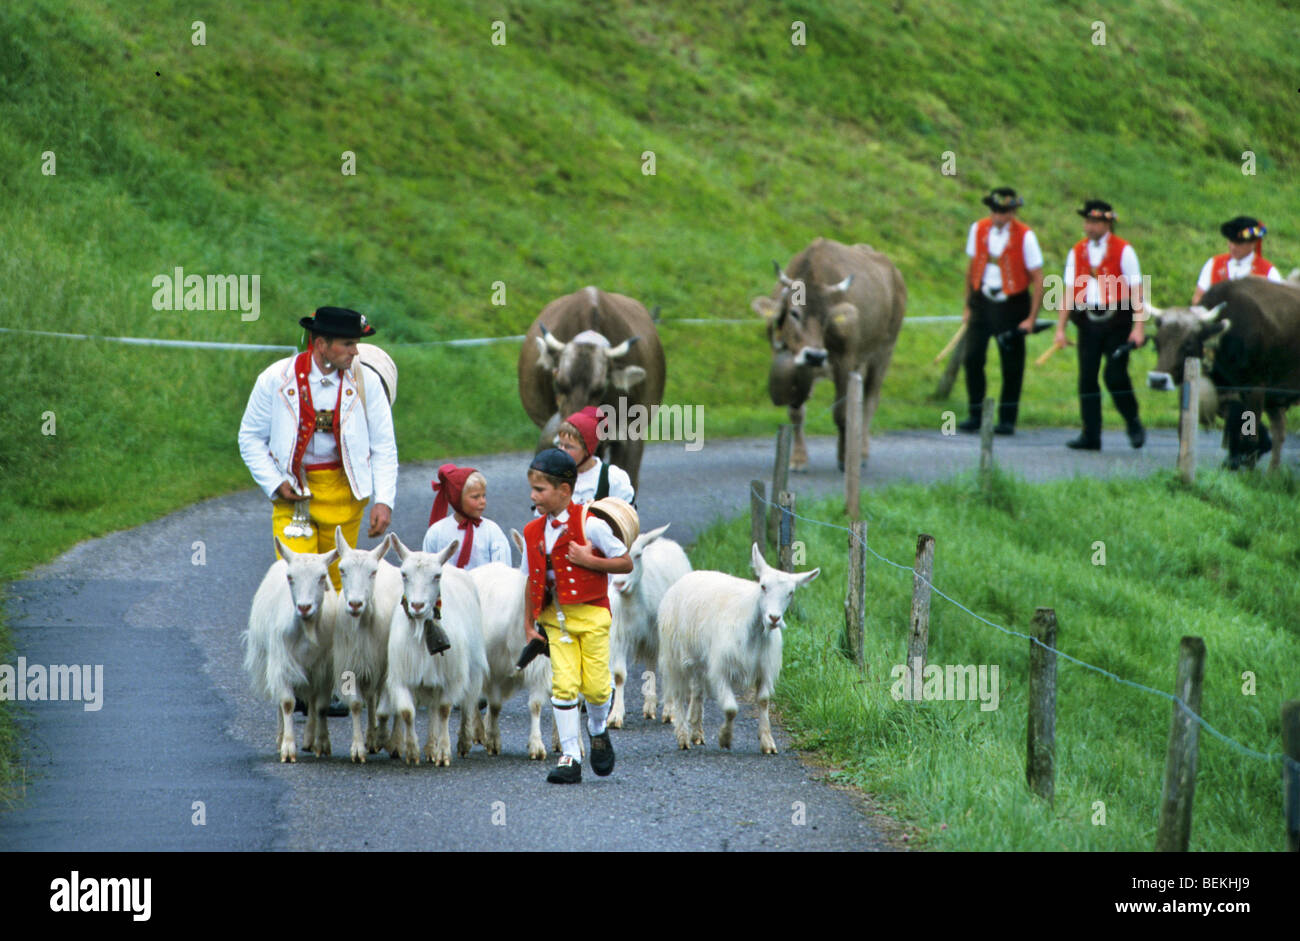 Children and men in traditional costumes herding goats and alpine cows, Alpaufzug, Appenzell, Switzerland Stock Photo